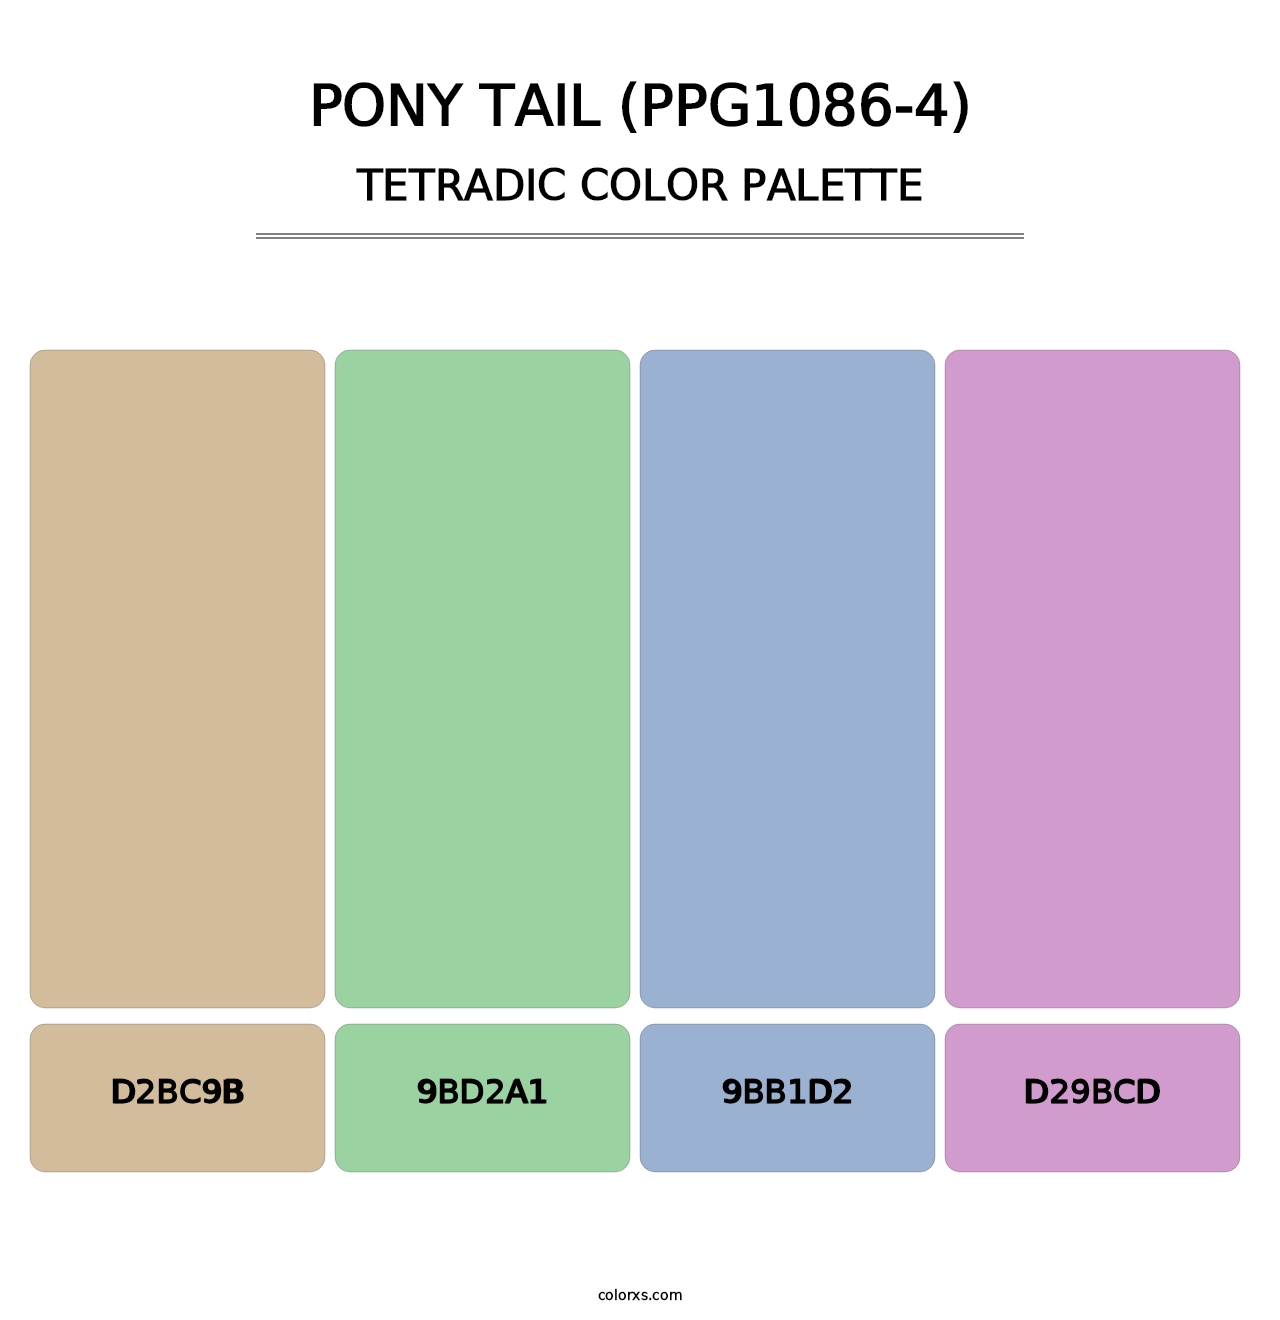 Pony Tail (PPG1086-4) - Tetradic Color Palette